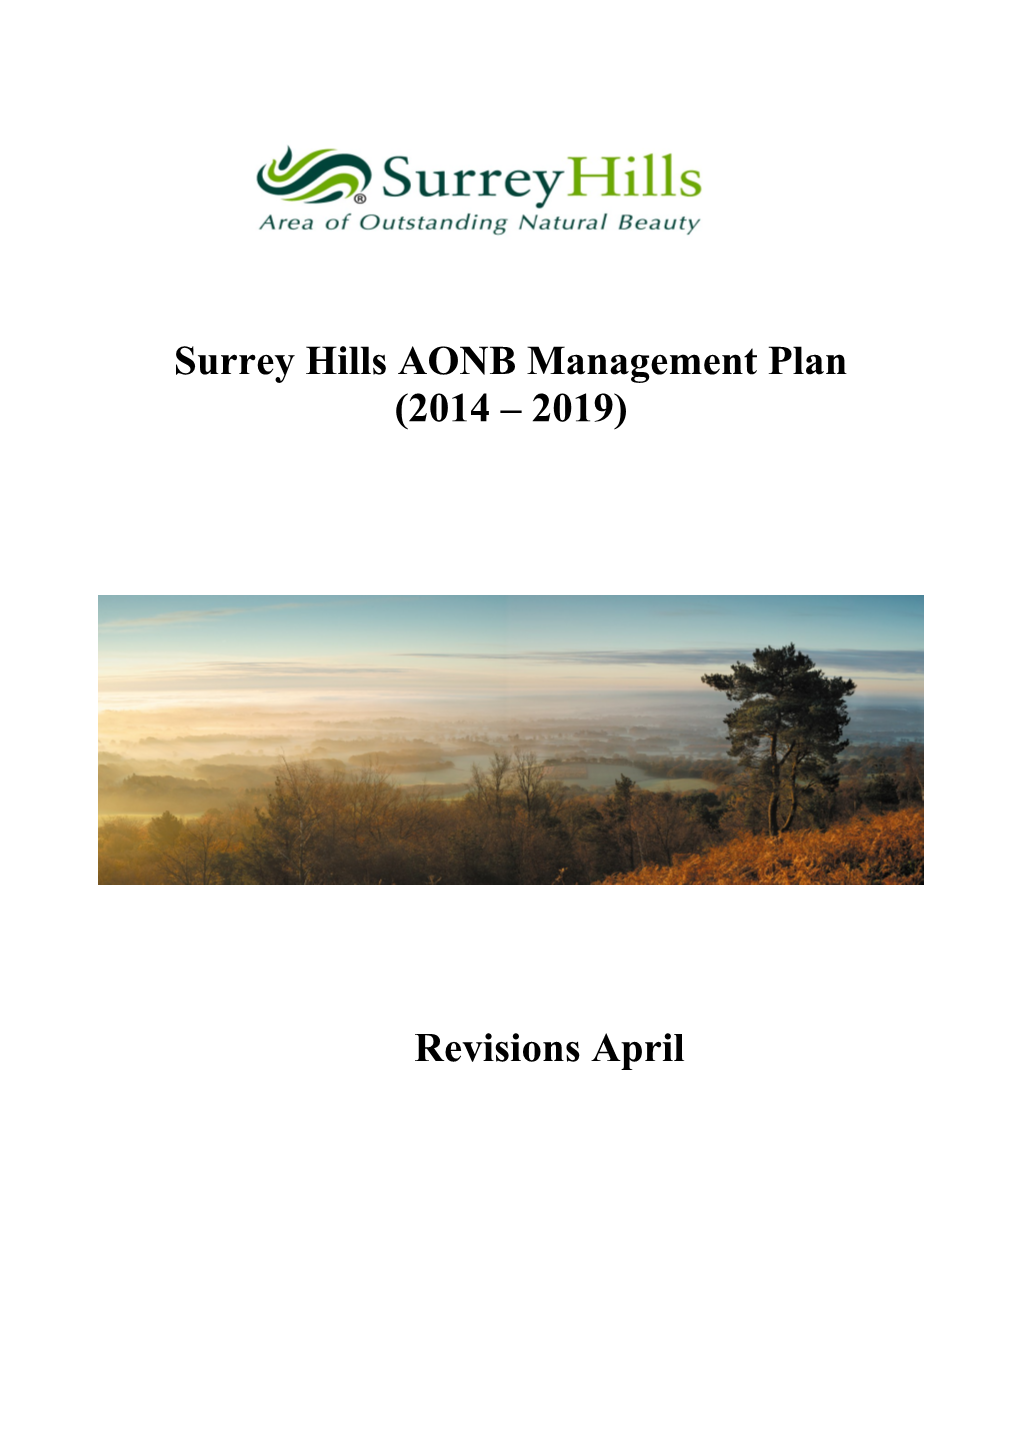 Aonbs and Their Statutory Management Plans